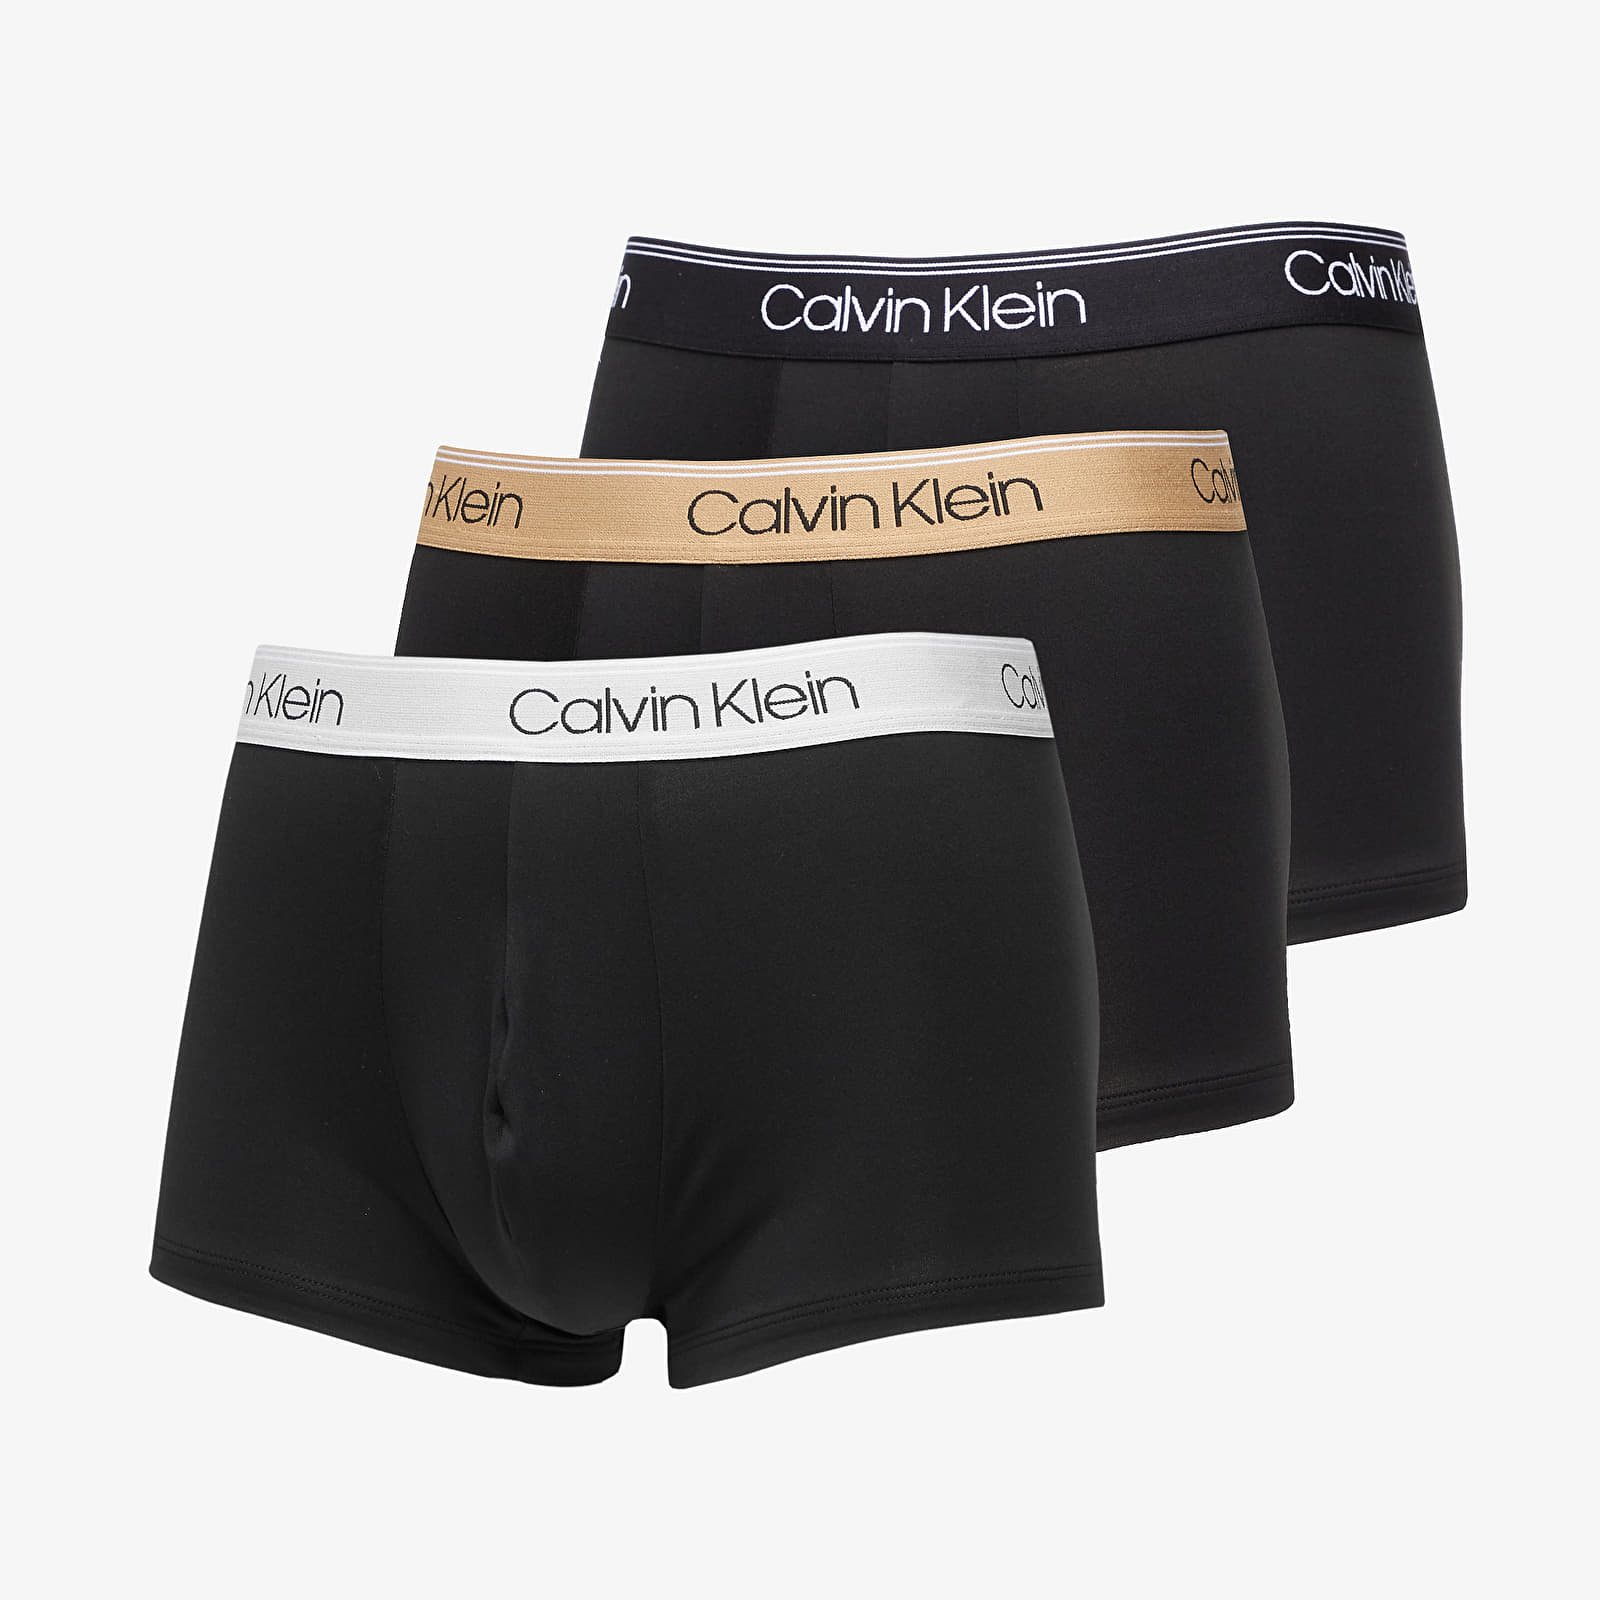 calvinklein on X: Stay focused: the Focused Fit trunk from CALVIN